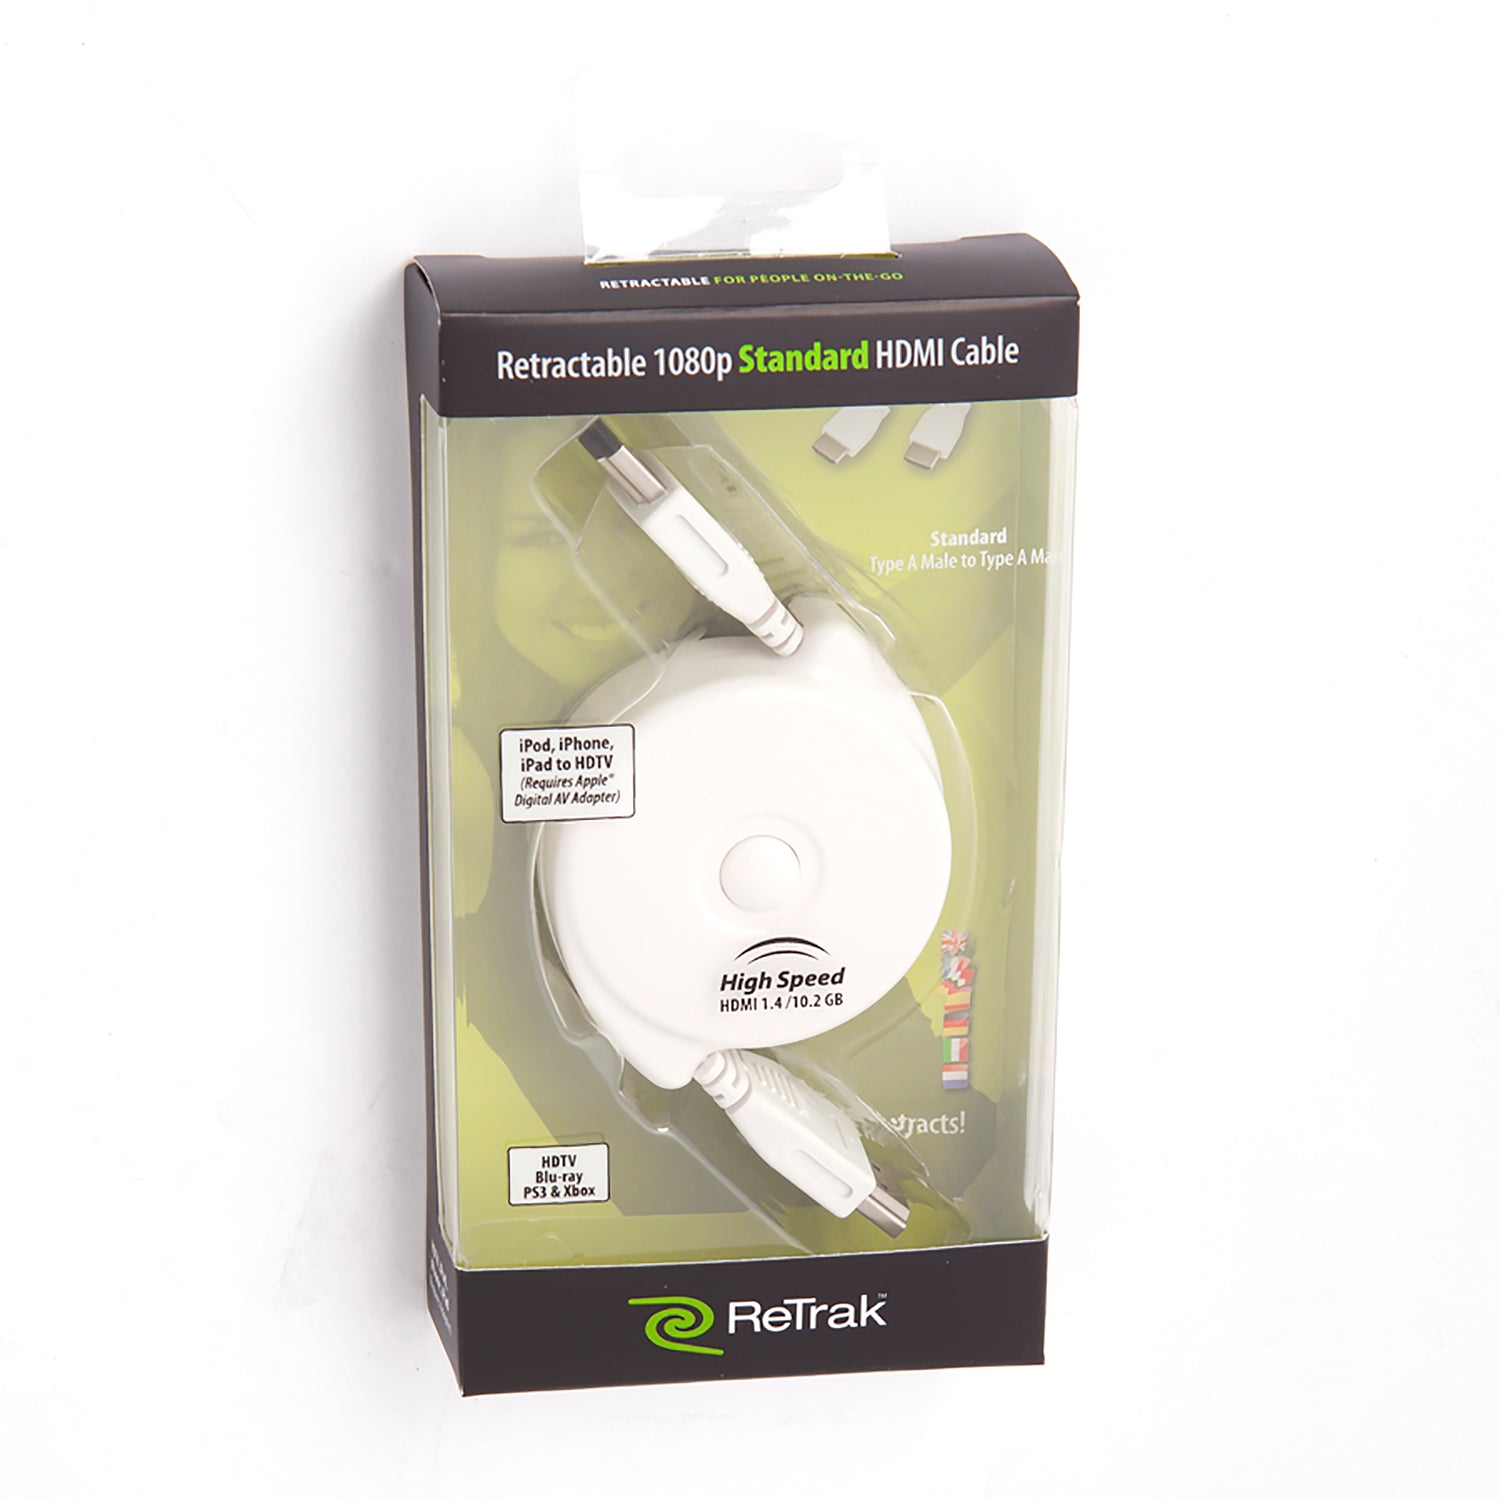 Retractable HDMI Cable | HDMI Cord for 1080p HDTV | Type A to Type A | White